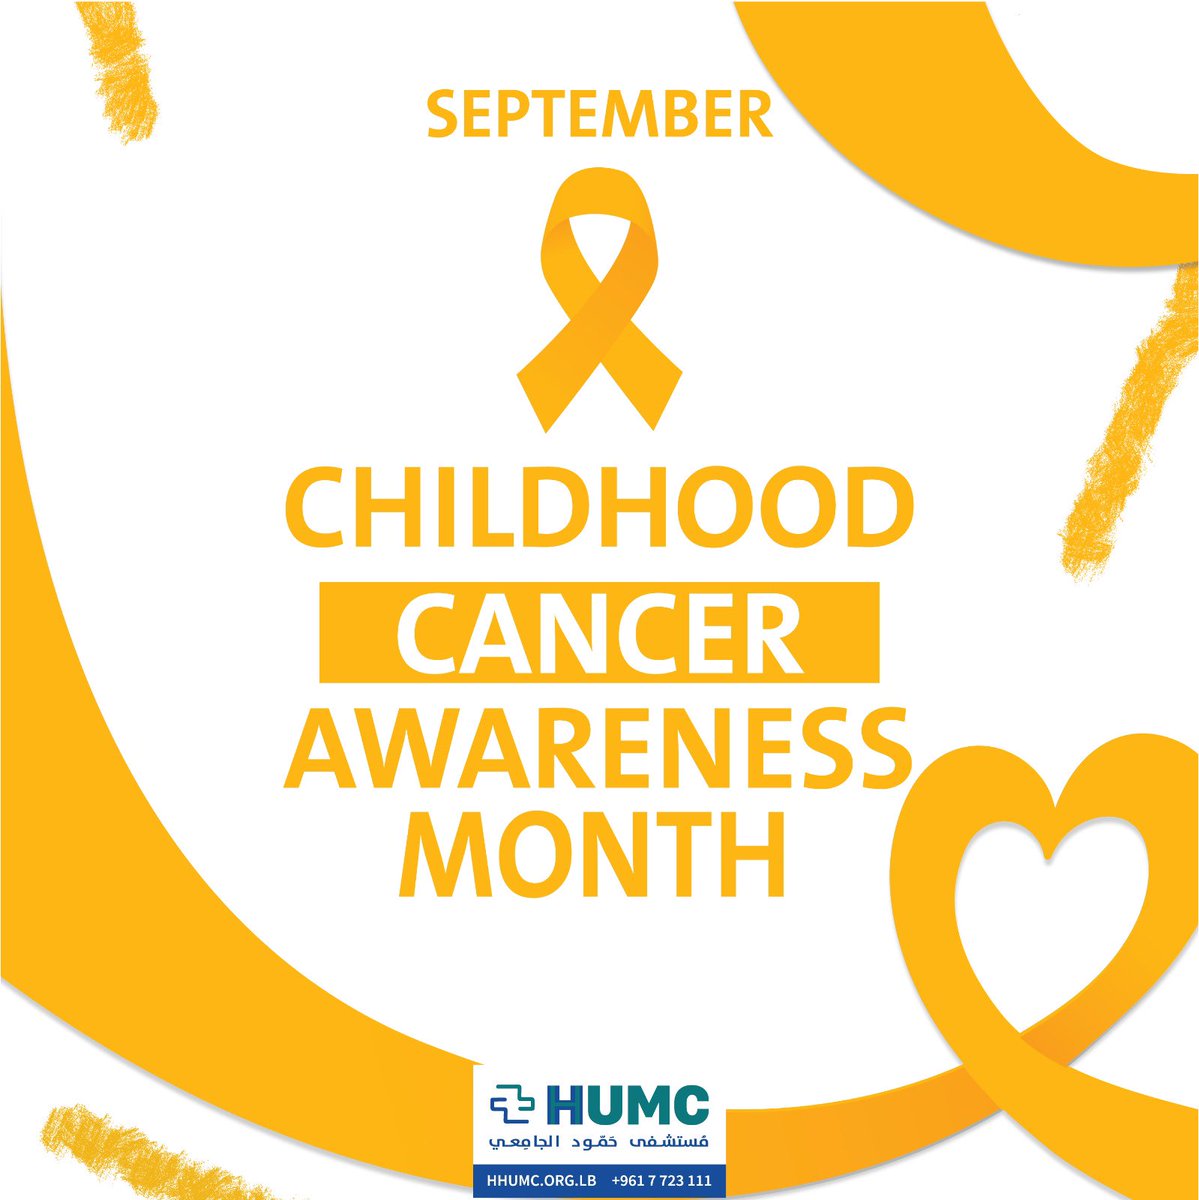 September is childhood cancer awareness month!
This year we will celebrate it by opening the first pediatric hematology oncology center in southern Lebanon with the support of #Giveachildabrighterfuture

HHUMC promises you to always spearhead the fight against cancer. 

#hhumc